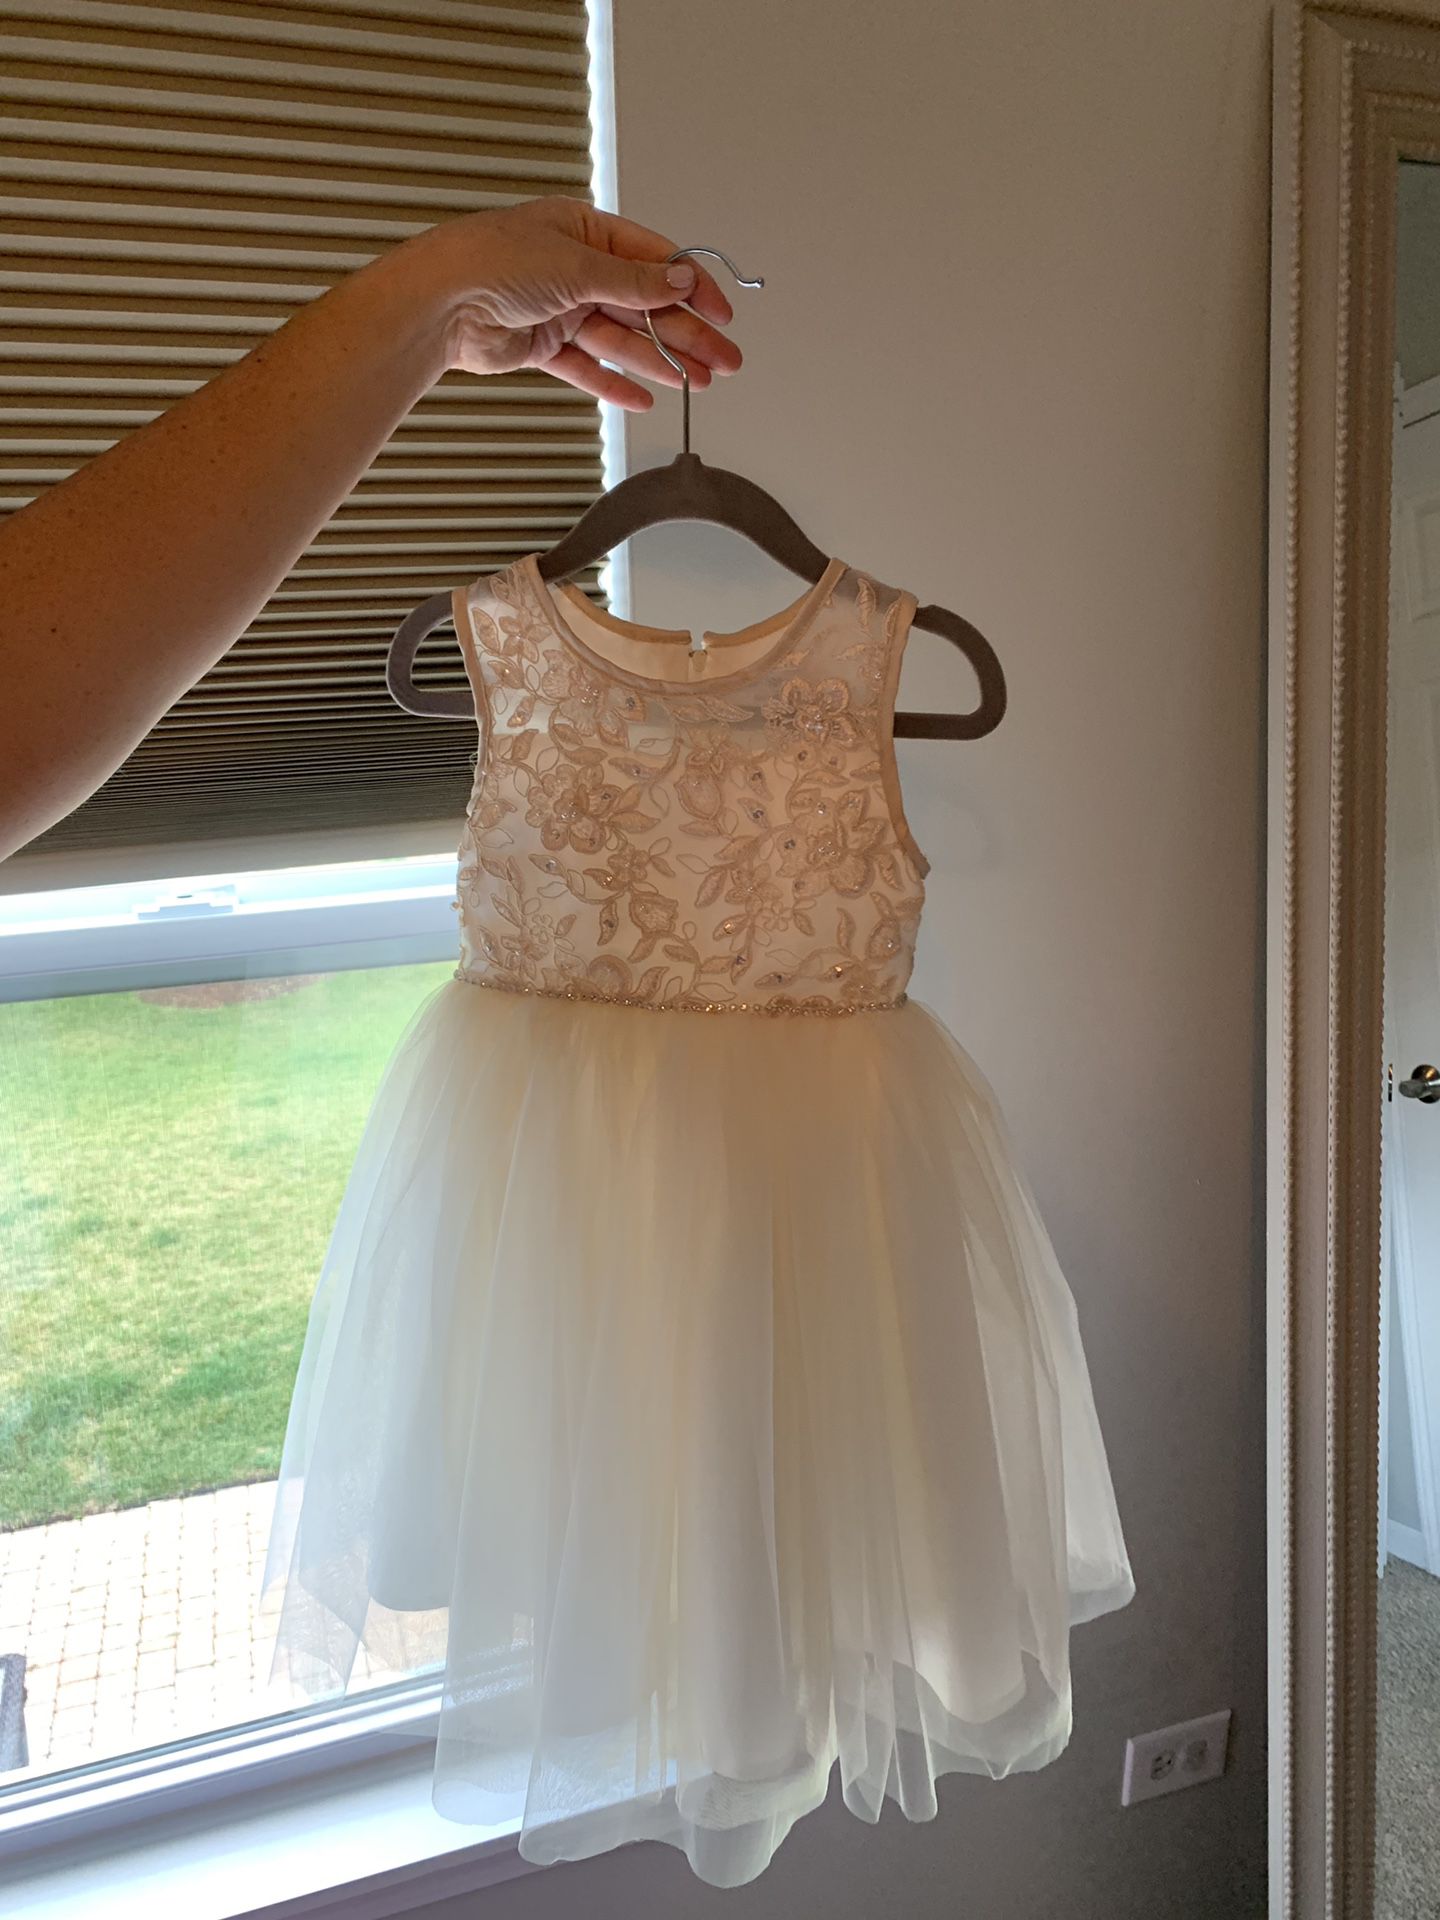 Champagne and ivory dress. 24 months, great for a speacial occasion or flower girl dress. Worn once!